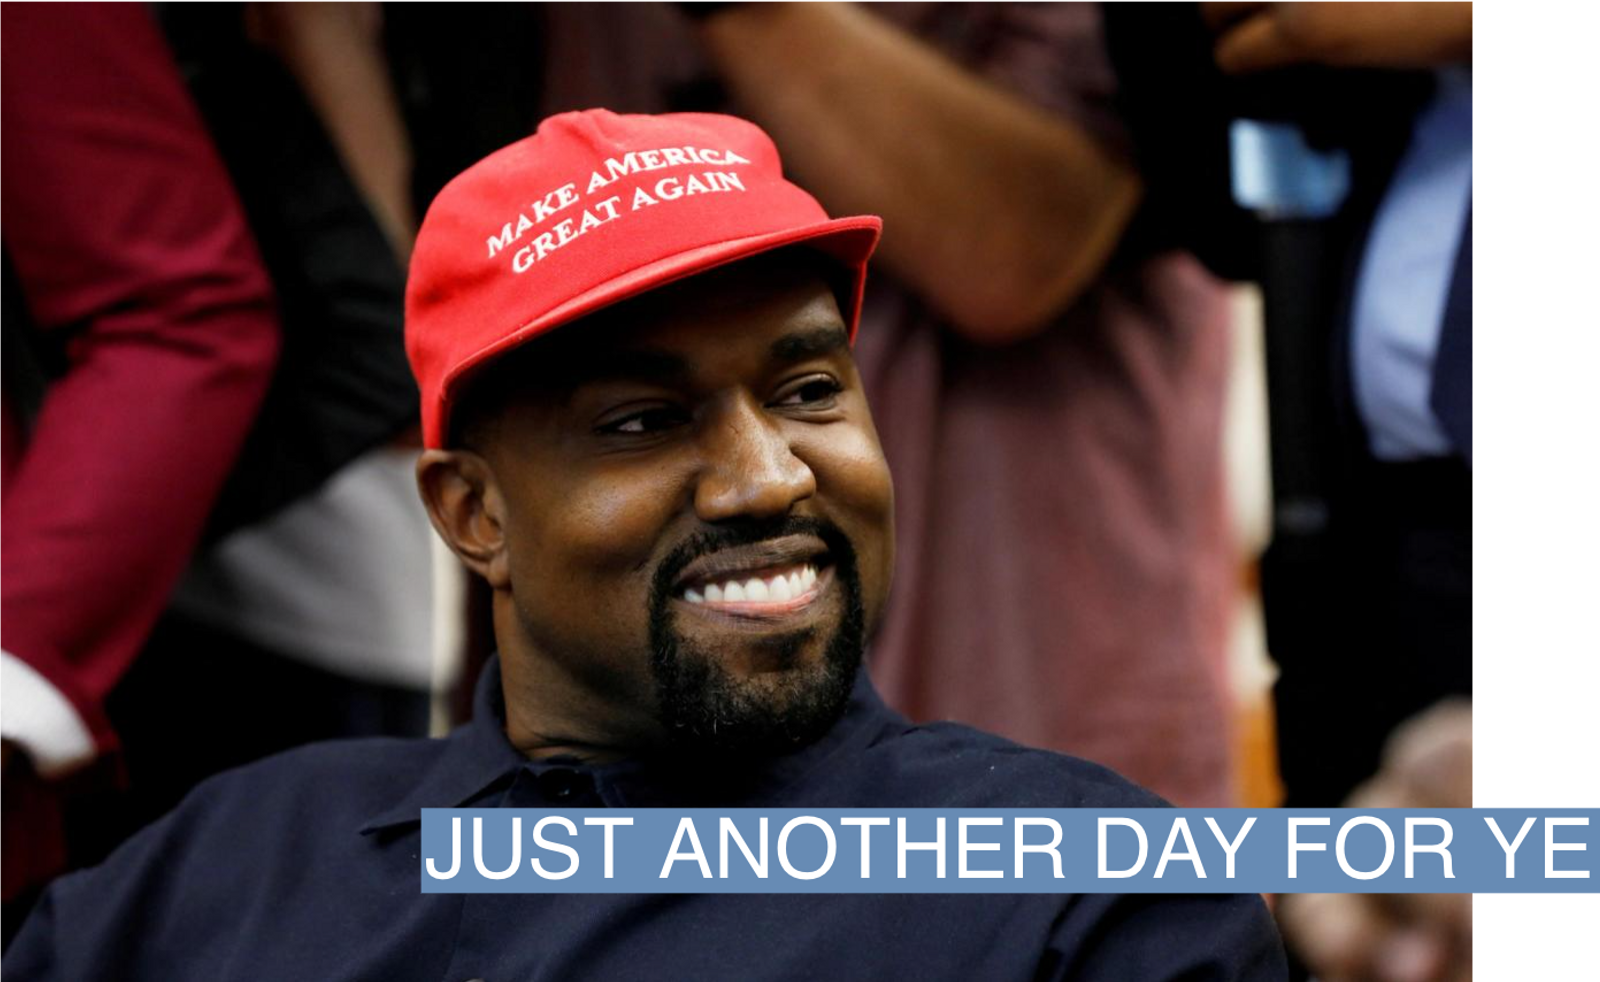 Rapper Kanye West smiles during a meeting with U.S. President Donald Trump to discuss criminal justice reform at the White House in Washington, U.S., October 11, 2018.